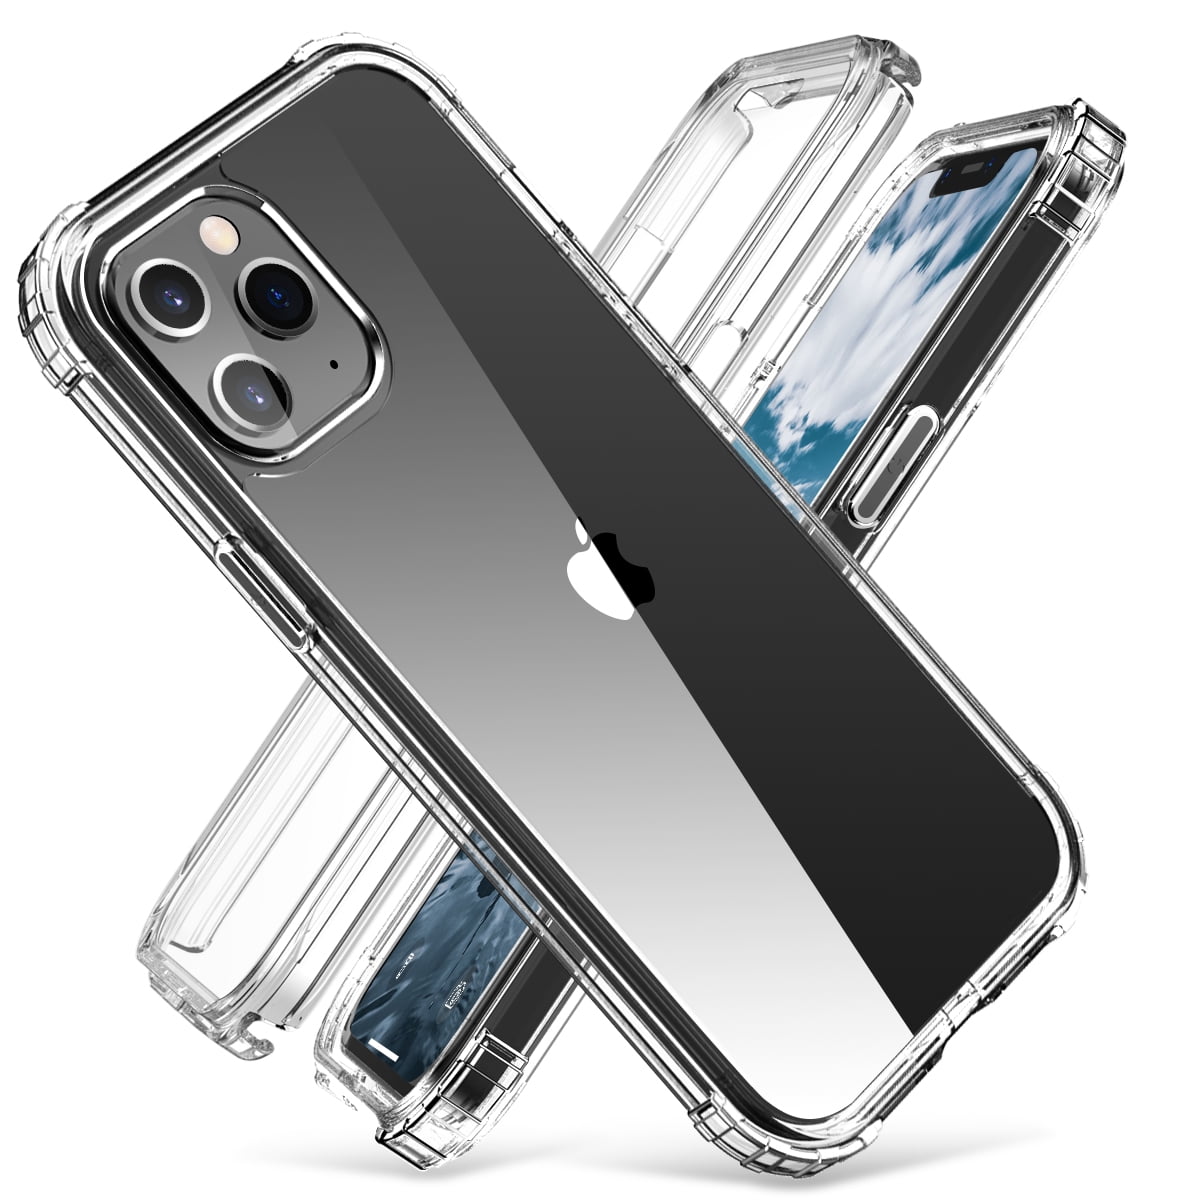 Hot For iphone 12 Pro Max case,ClearHard PC+Soft Silicone 3Layers Hybrid 360 Degree Full Body Protect Popular for iphone 12 mini